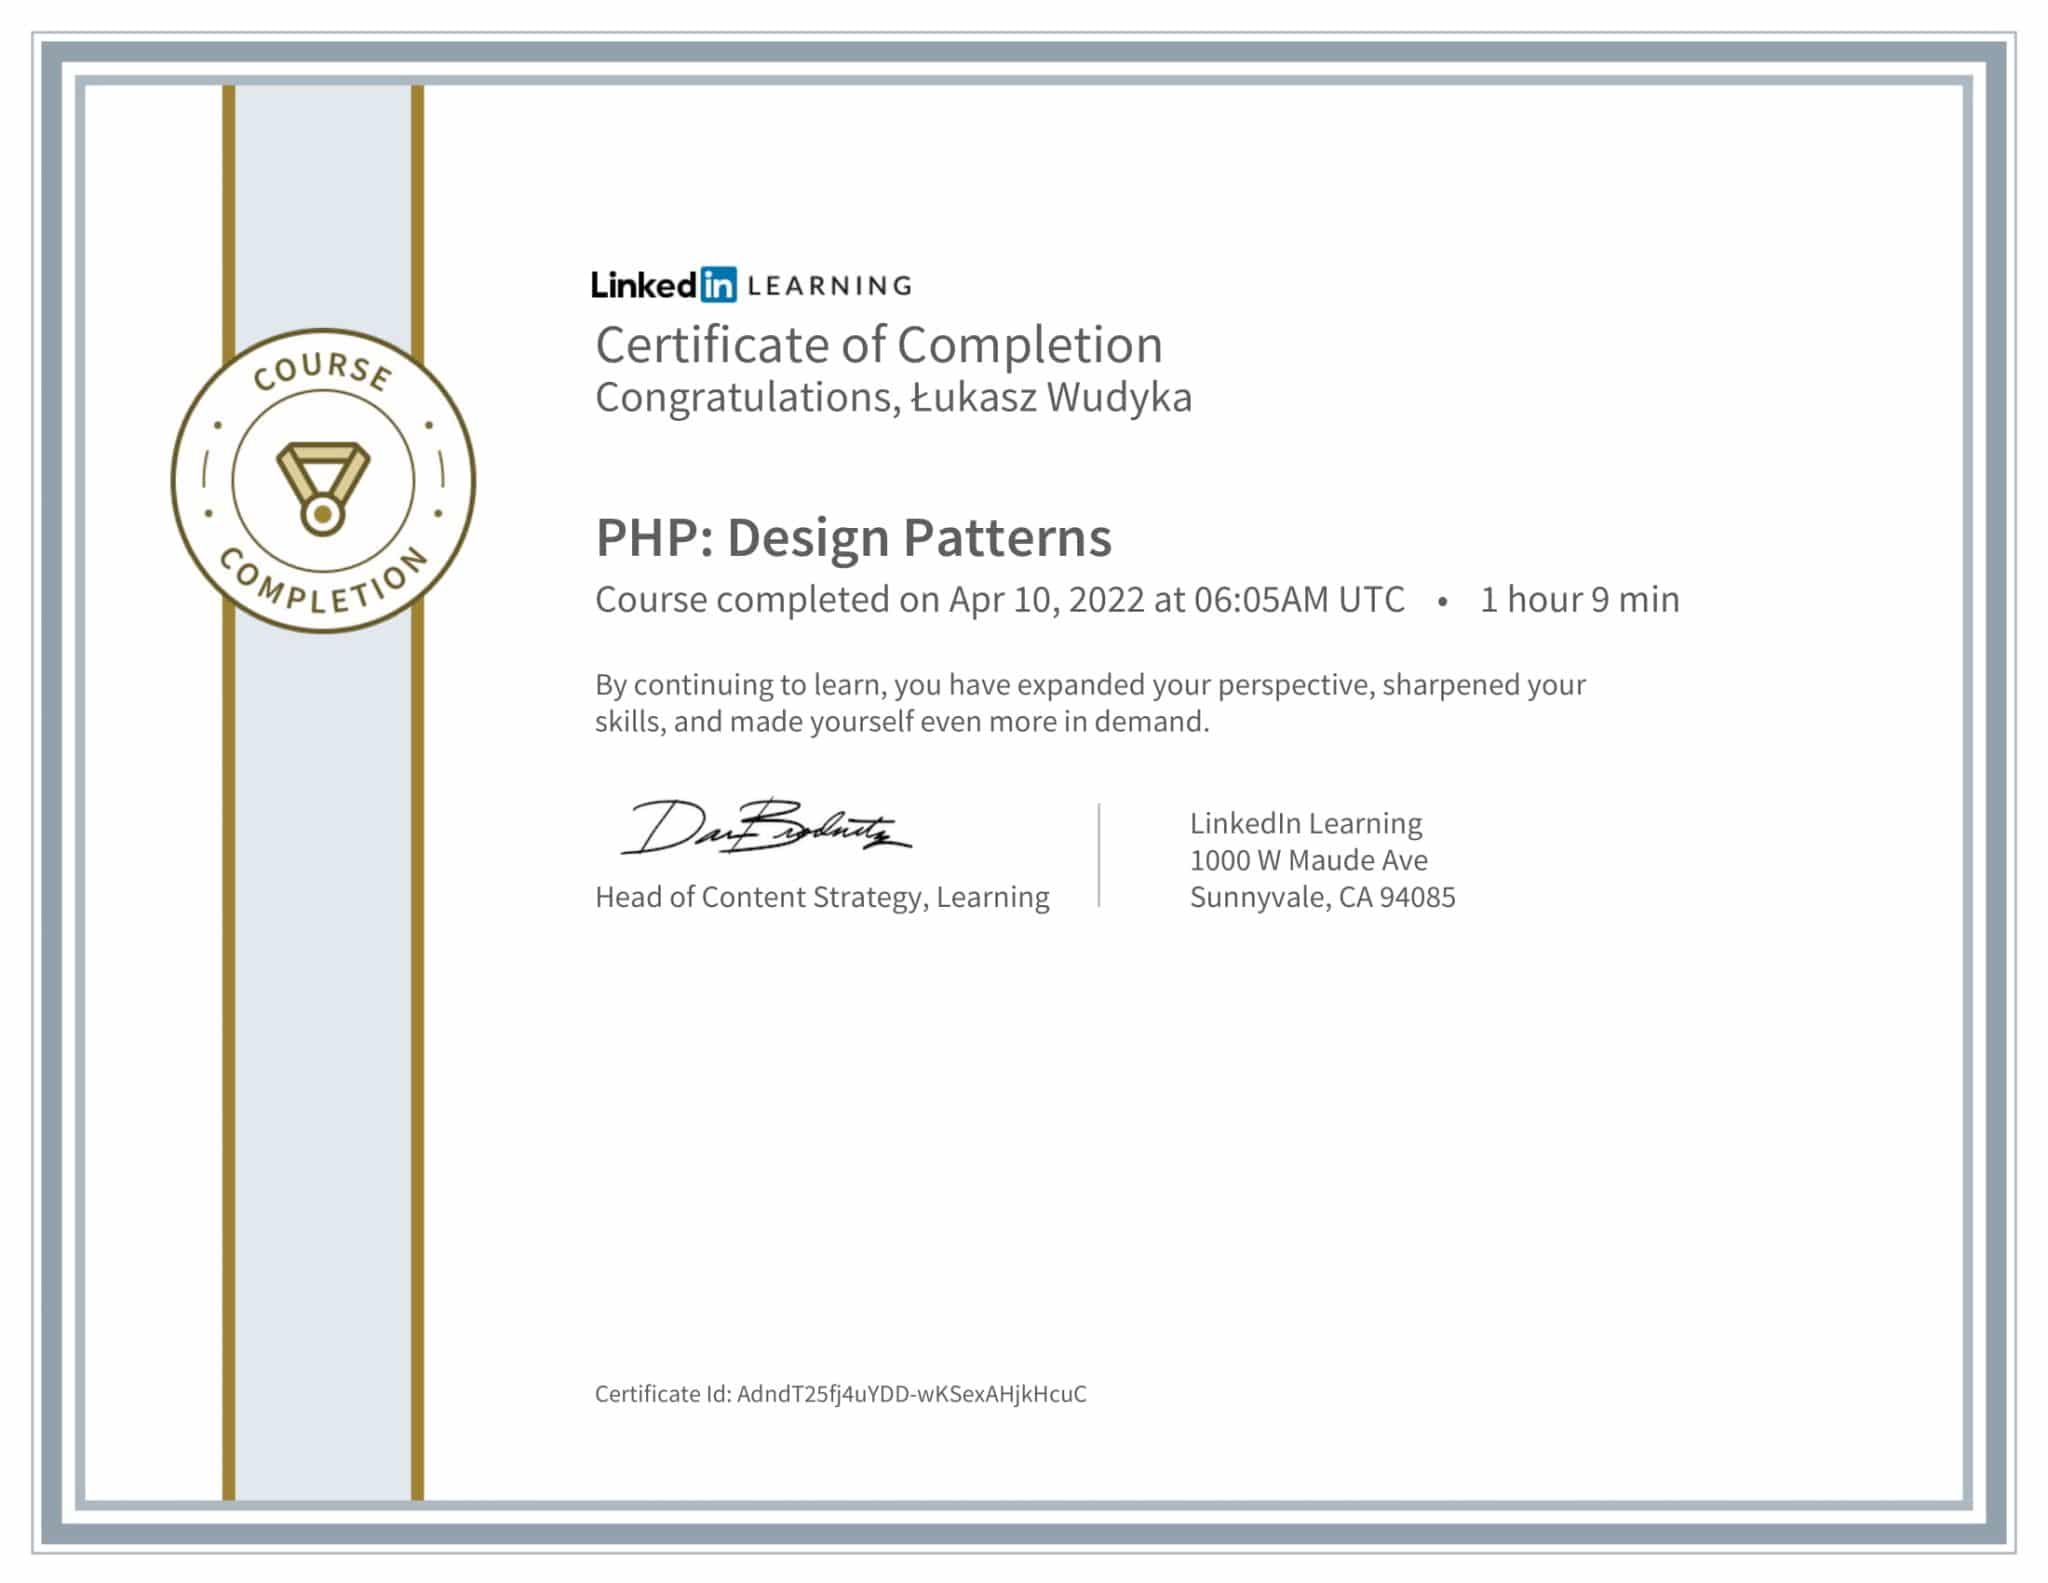 CertificateOfCompletion_PHP Design Patterns-1